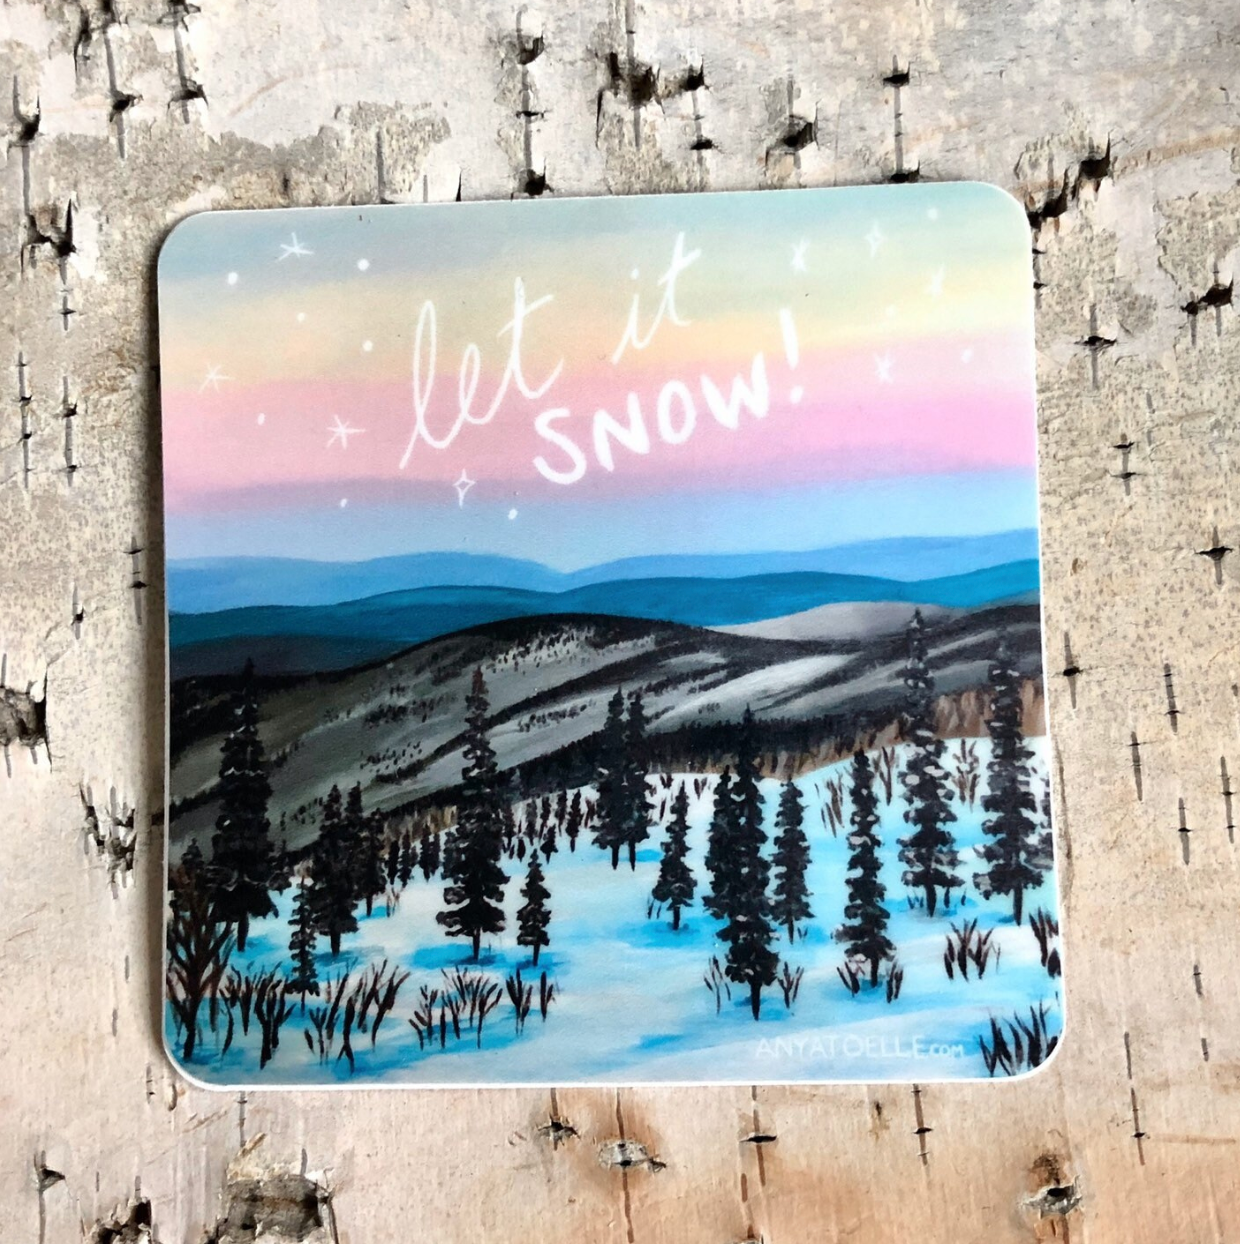 Let it Snow Sticker by Anya Toelle